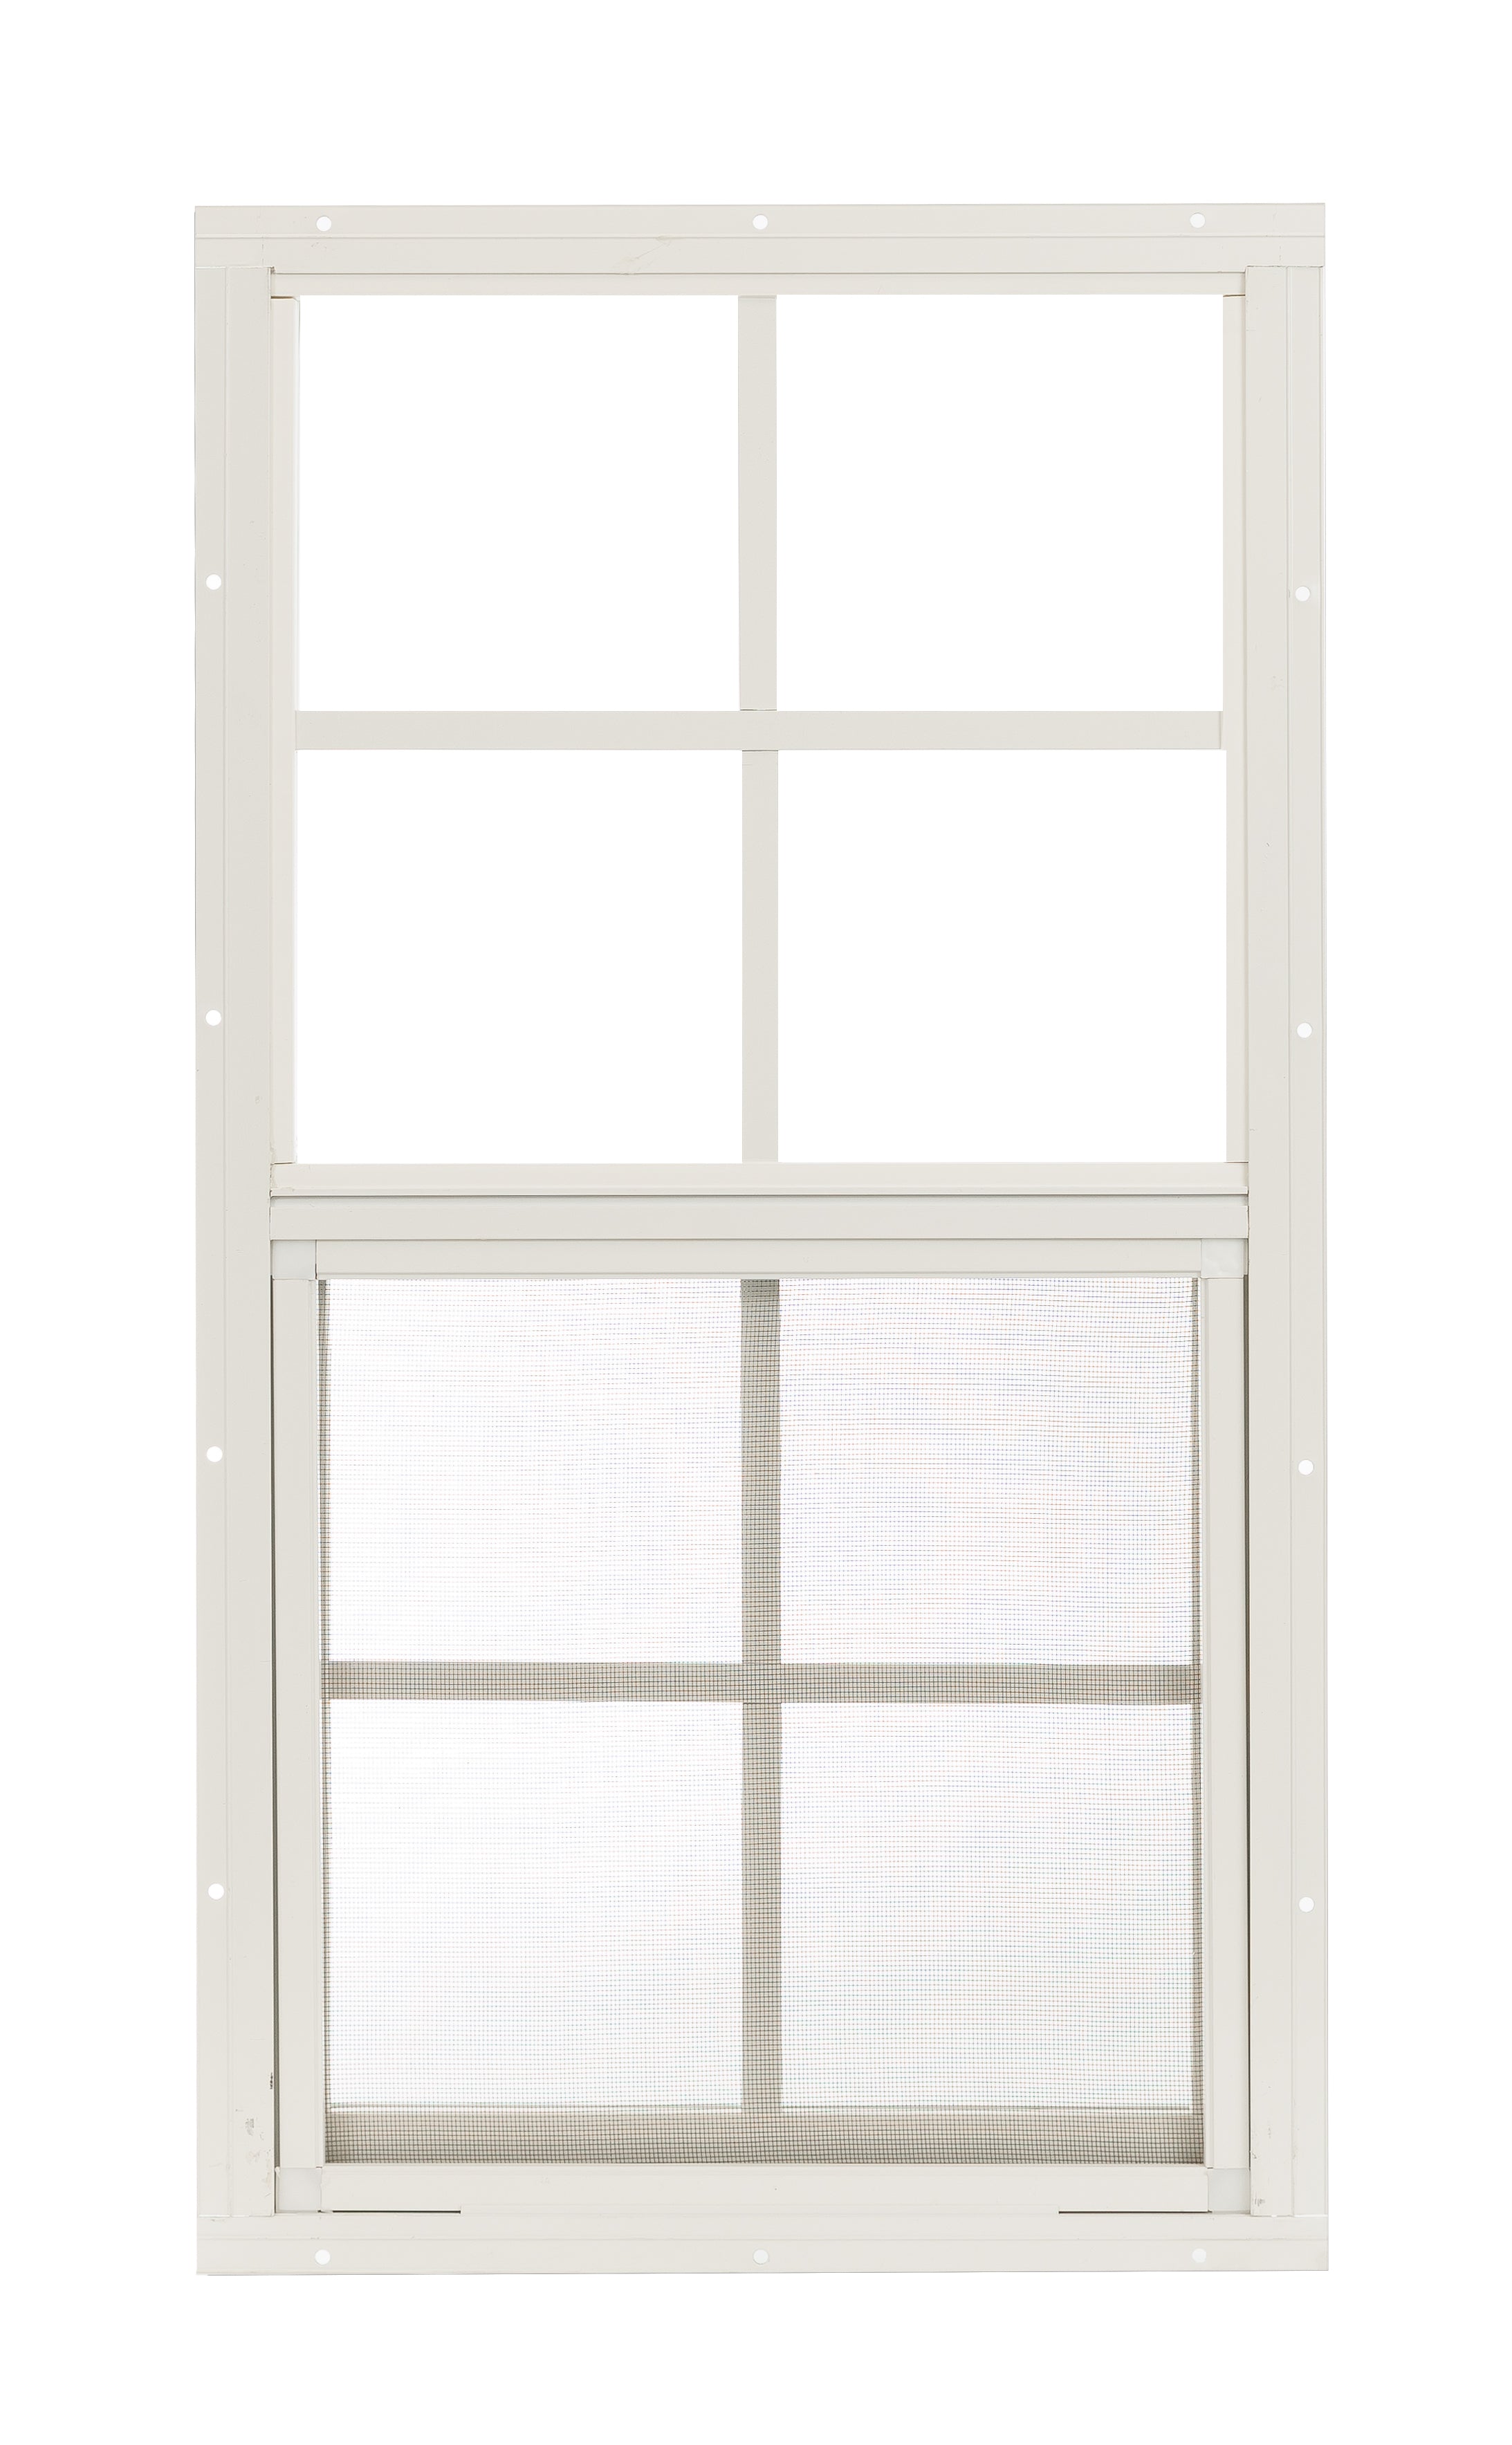 14" W x 27" H Single Hung Flush Mount White Window for Sheds, Playhouses, and MORE